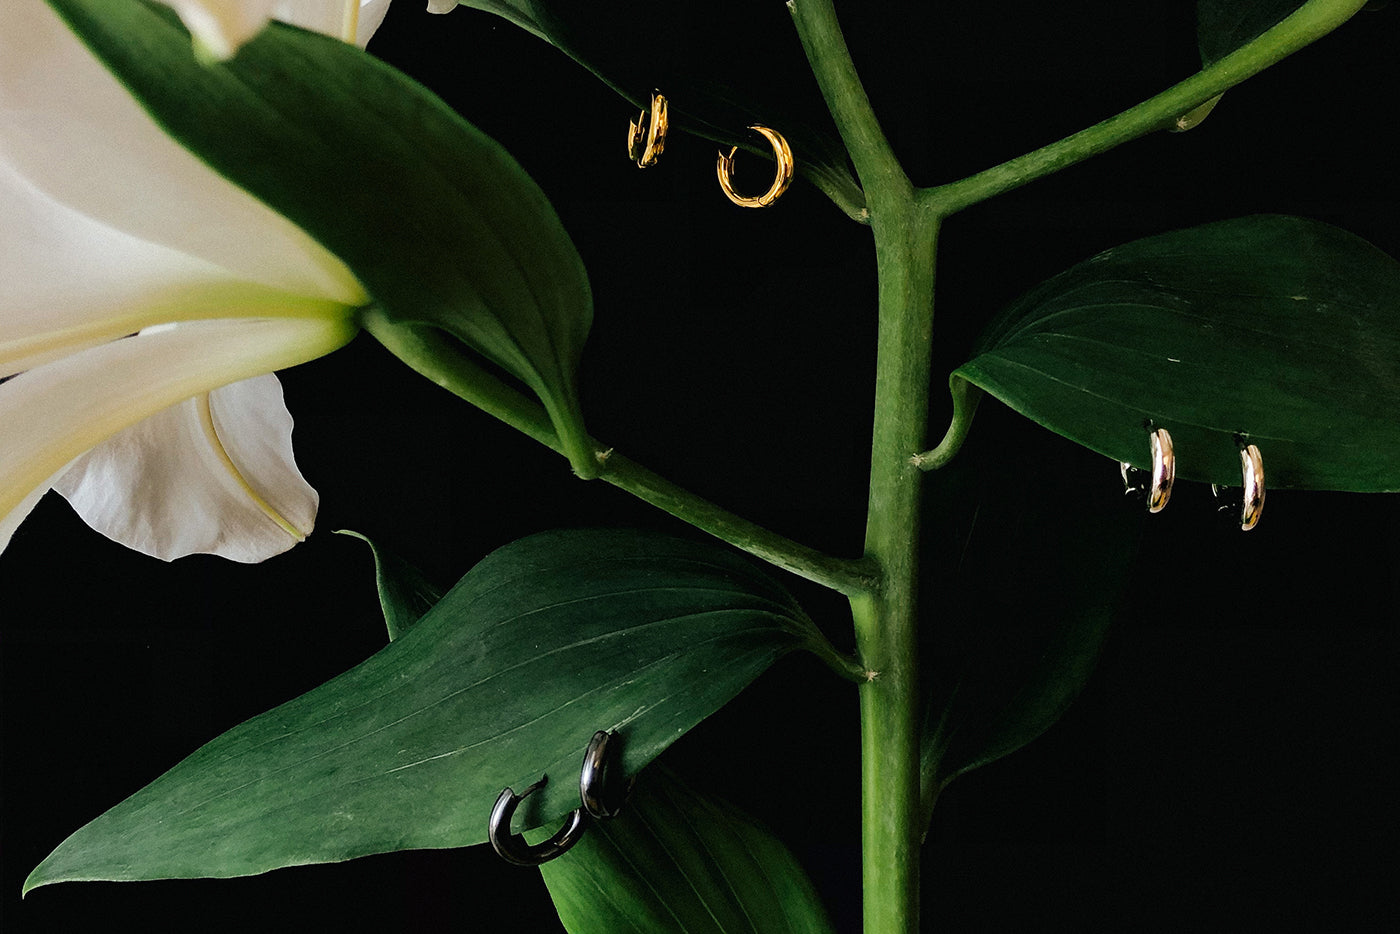 Water lillies with gold, silver and oxidised hoop earrings pierced through the leaves.